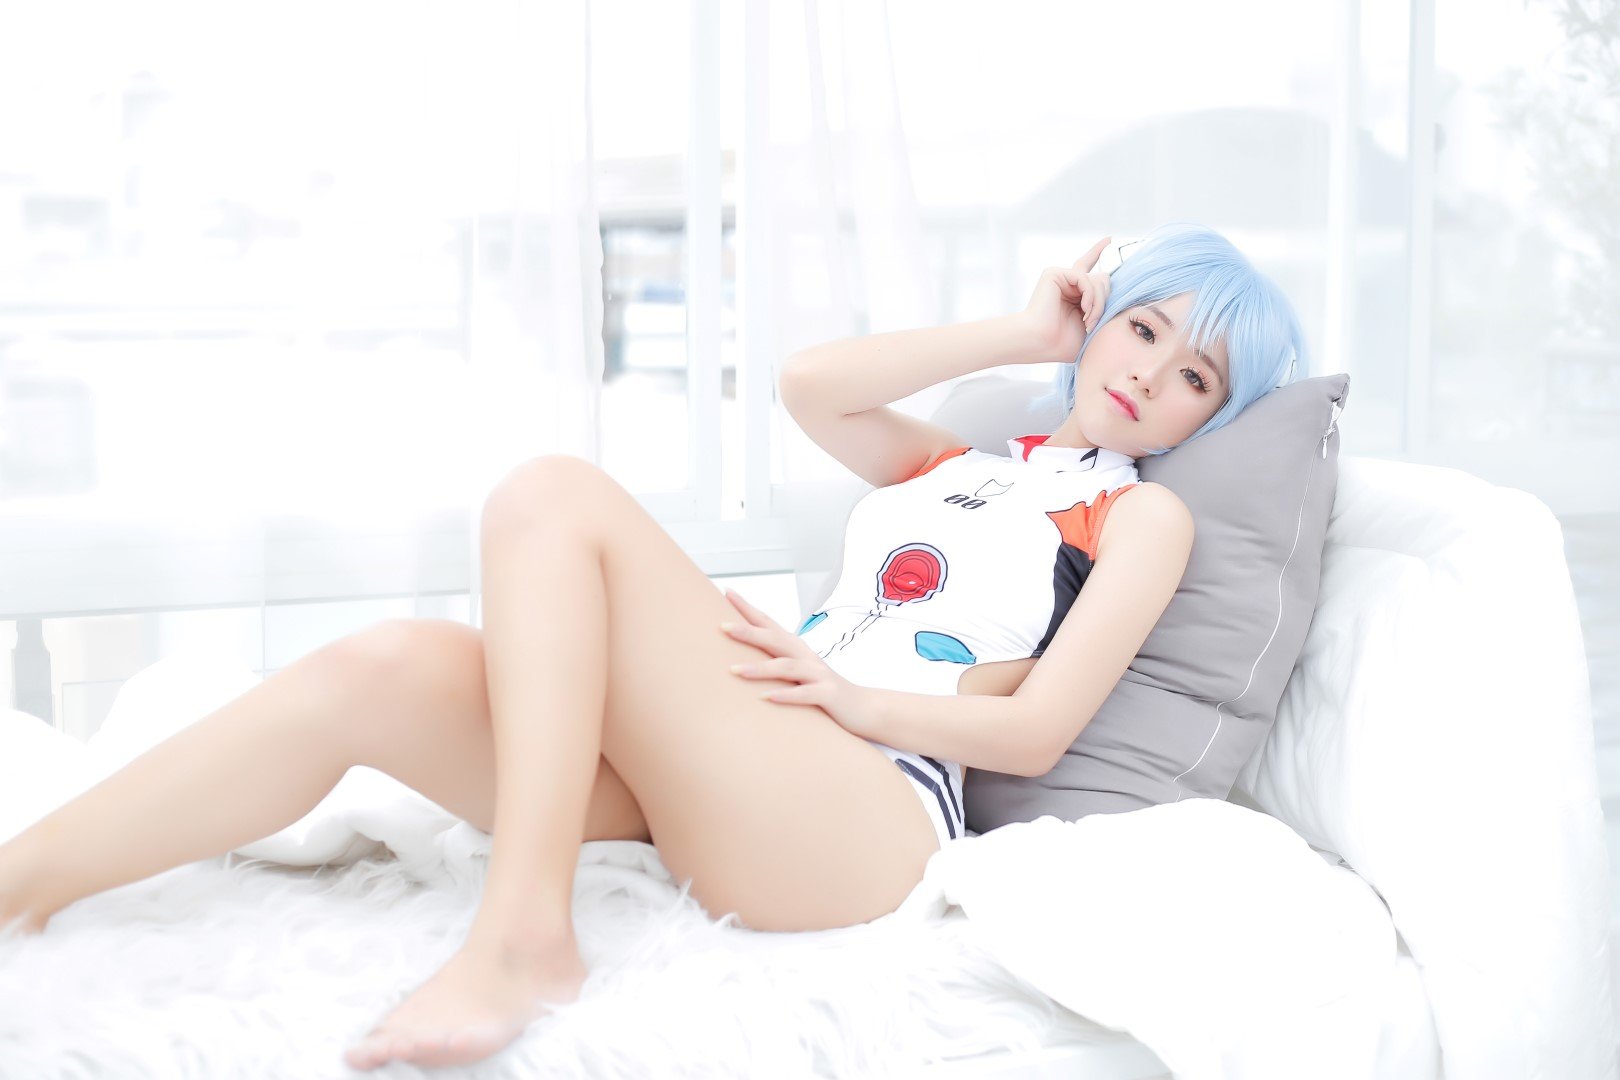 Nude ayanami cosplay evenink rei Search Results